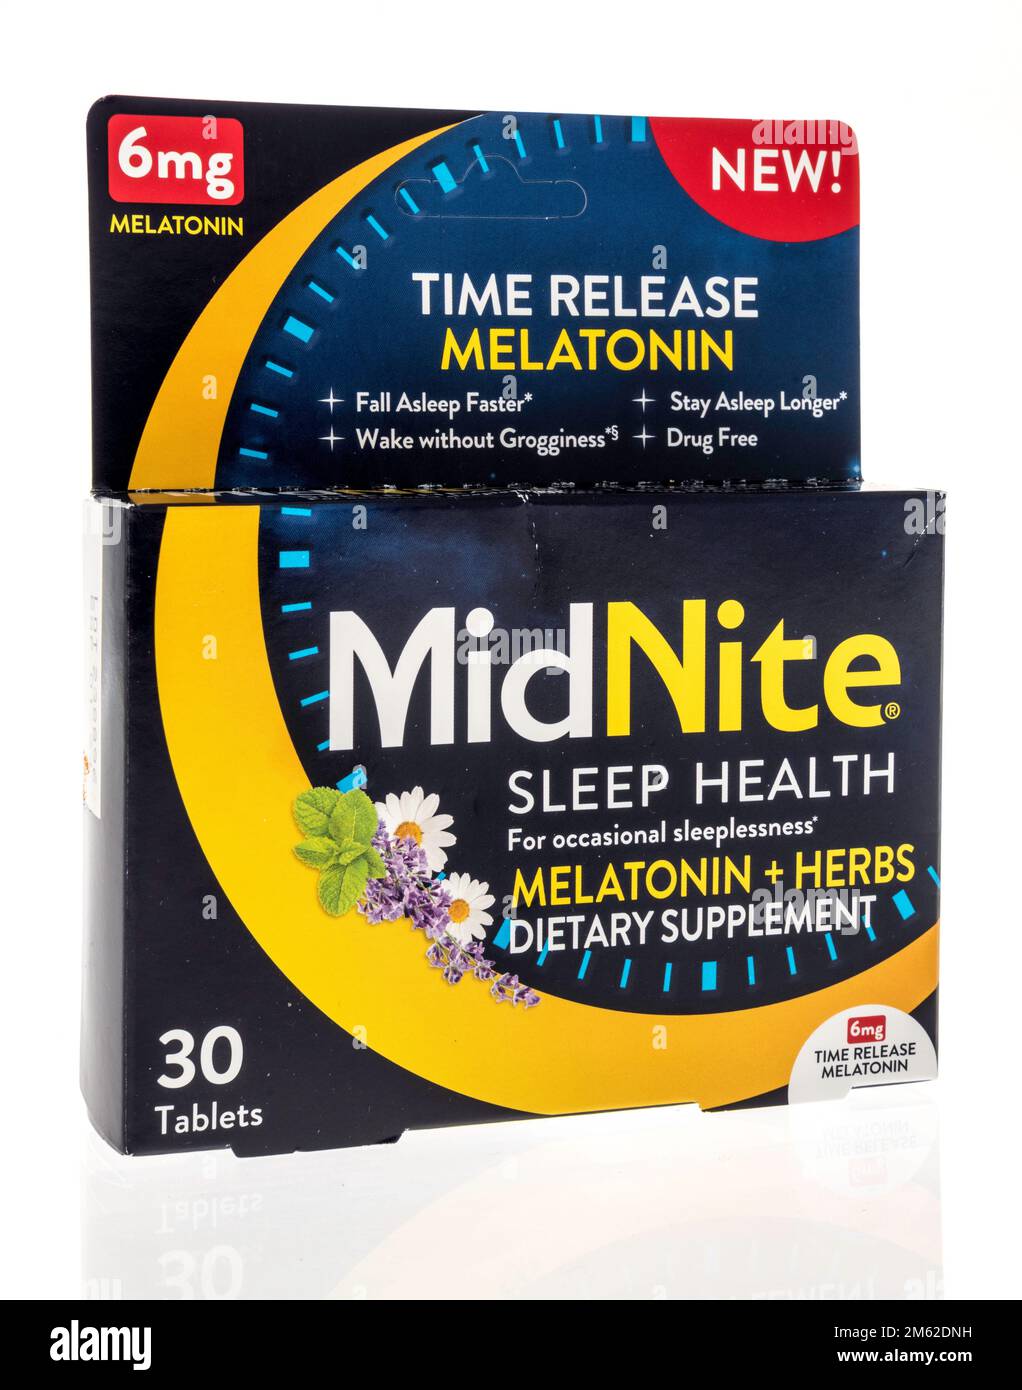 Winneconne, WI - 28 November 2022: A package of Midnite  sleep aid supplement with melatonin on an isolated background. Stock Photo